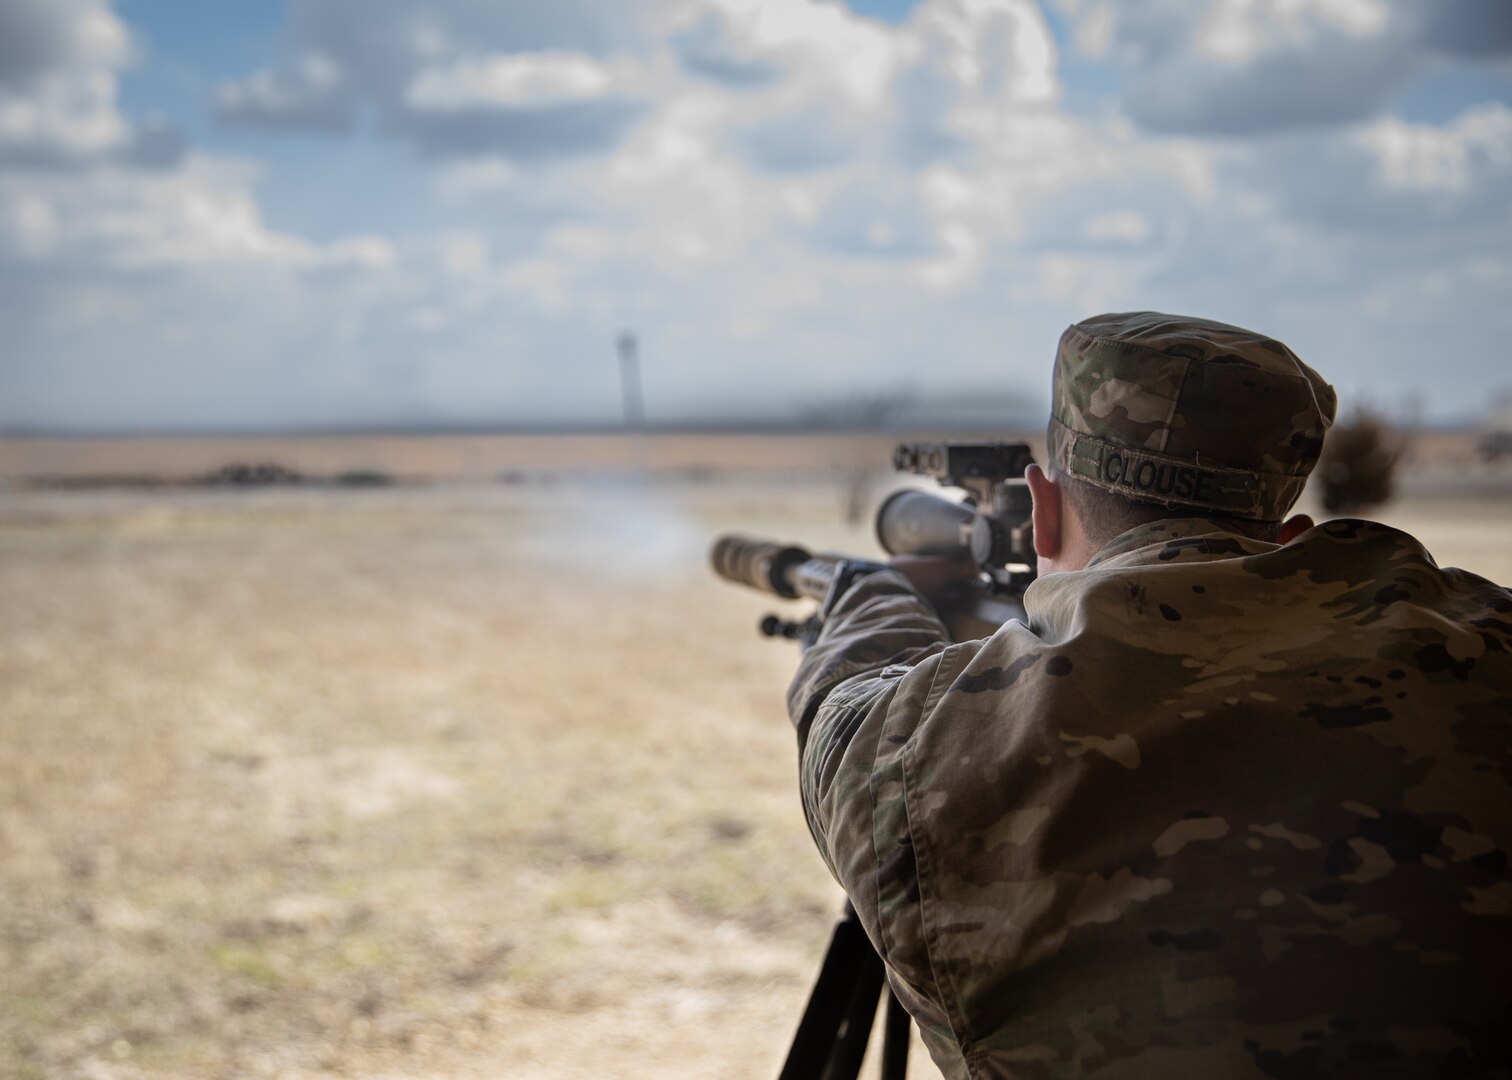 Spc. Joshua Clouse, an infantryman with Alpha Company, 1st Battalion, 179th Infantry Regiment, 45th Infantry Brigade Combat Team, fires an MK 22 Precision Sniper Rifle at the sniper qualification range at Fort Riley, Kan., March 25, 2023. (Oklahoma National Guard photo by Spc. Danielle Rayon)